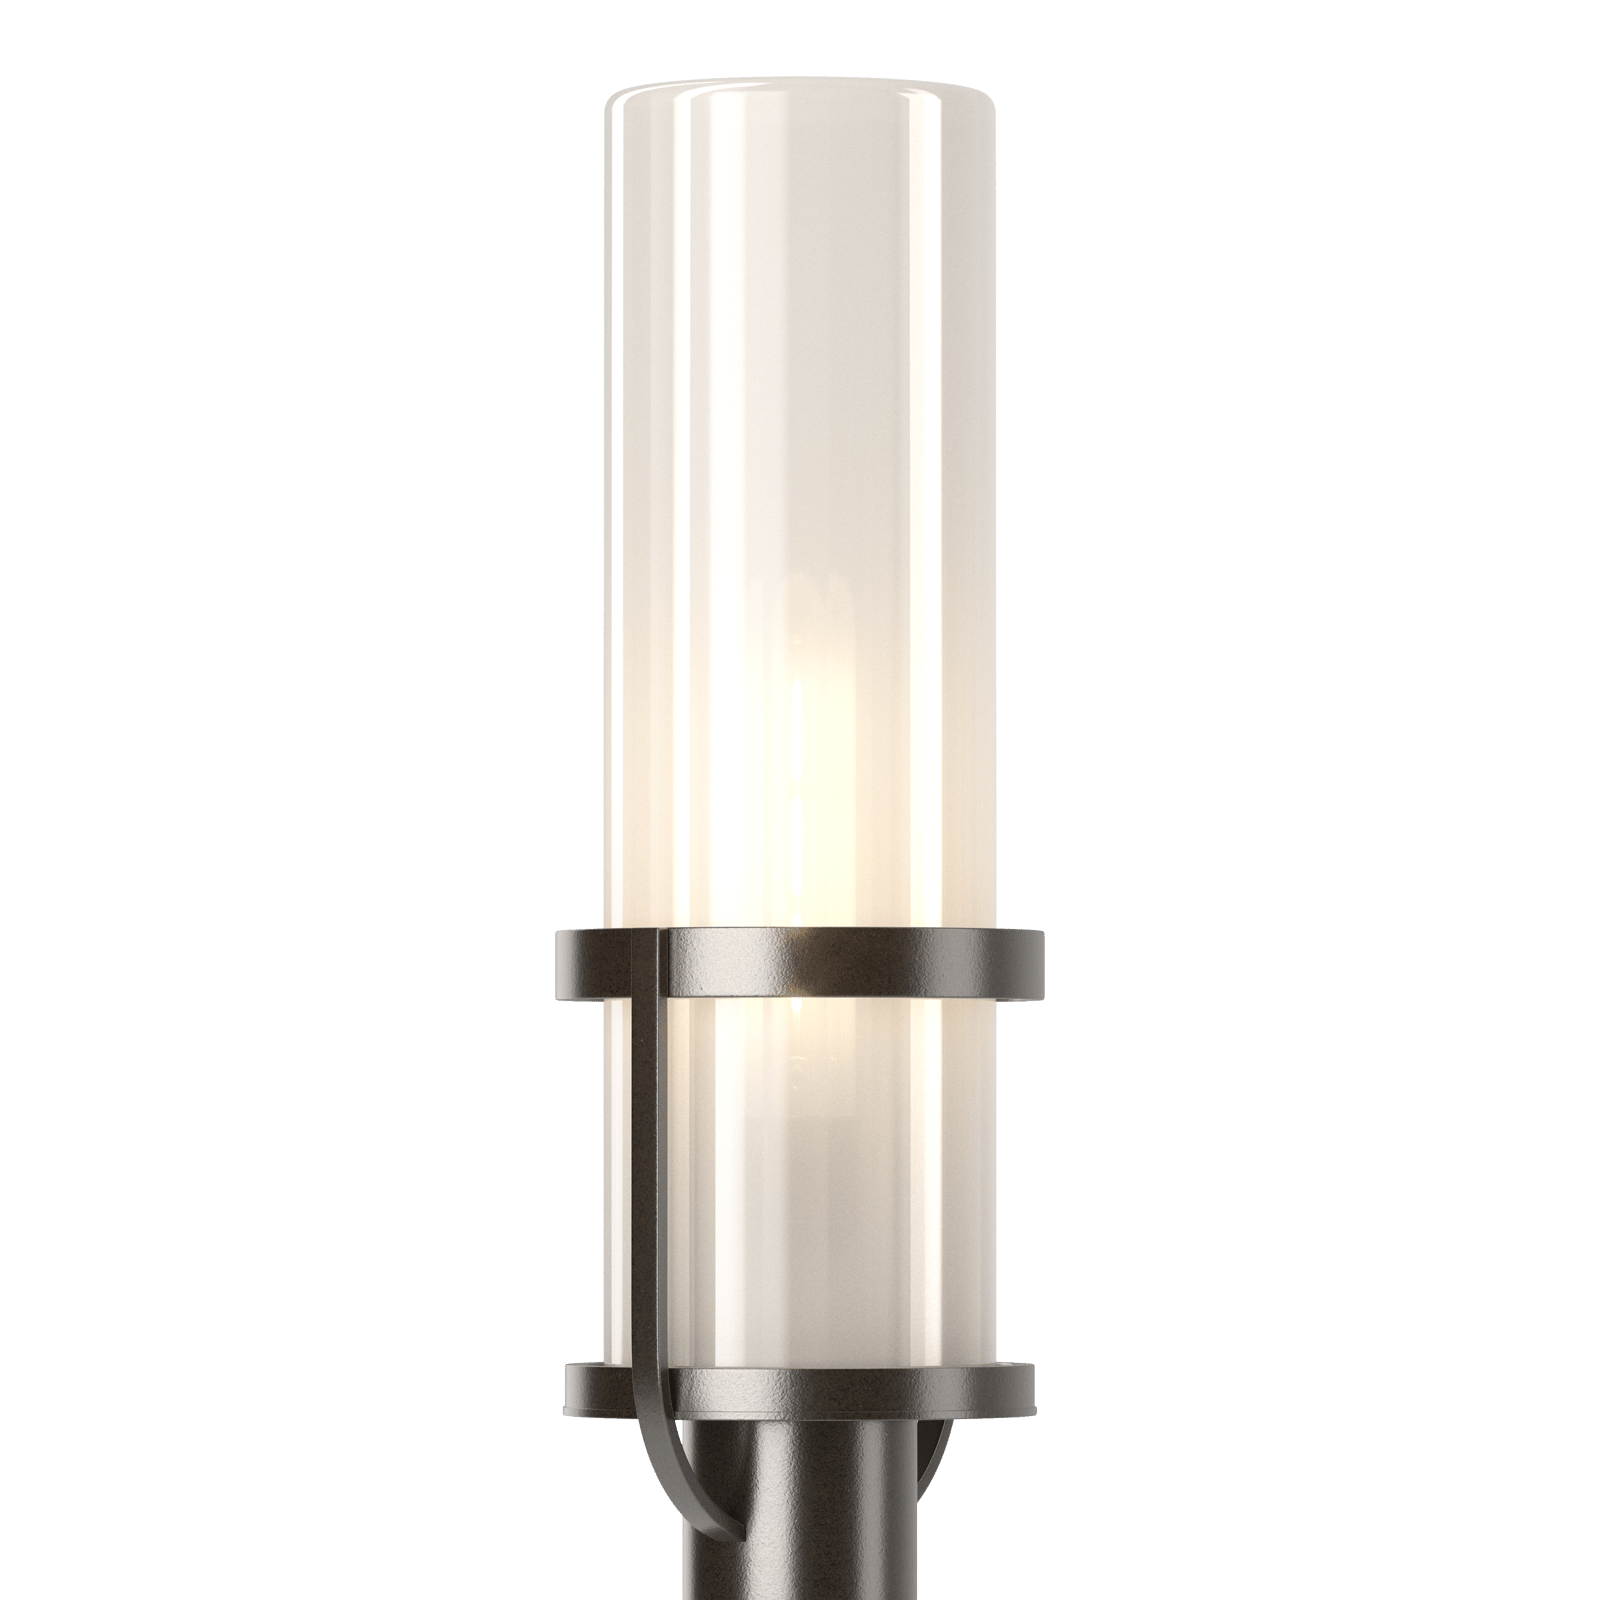 Hubbardton Forge Alcove Outdoor Post Light Outdoor l Post/Pier Mounts Hubbardton Forge Coastal Oil Rubbed Bronze Frosted Glass (FD) 